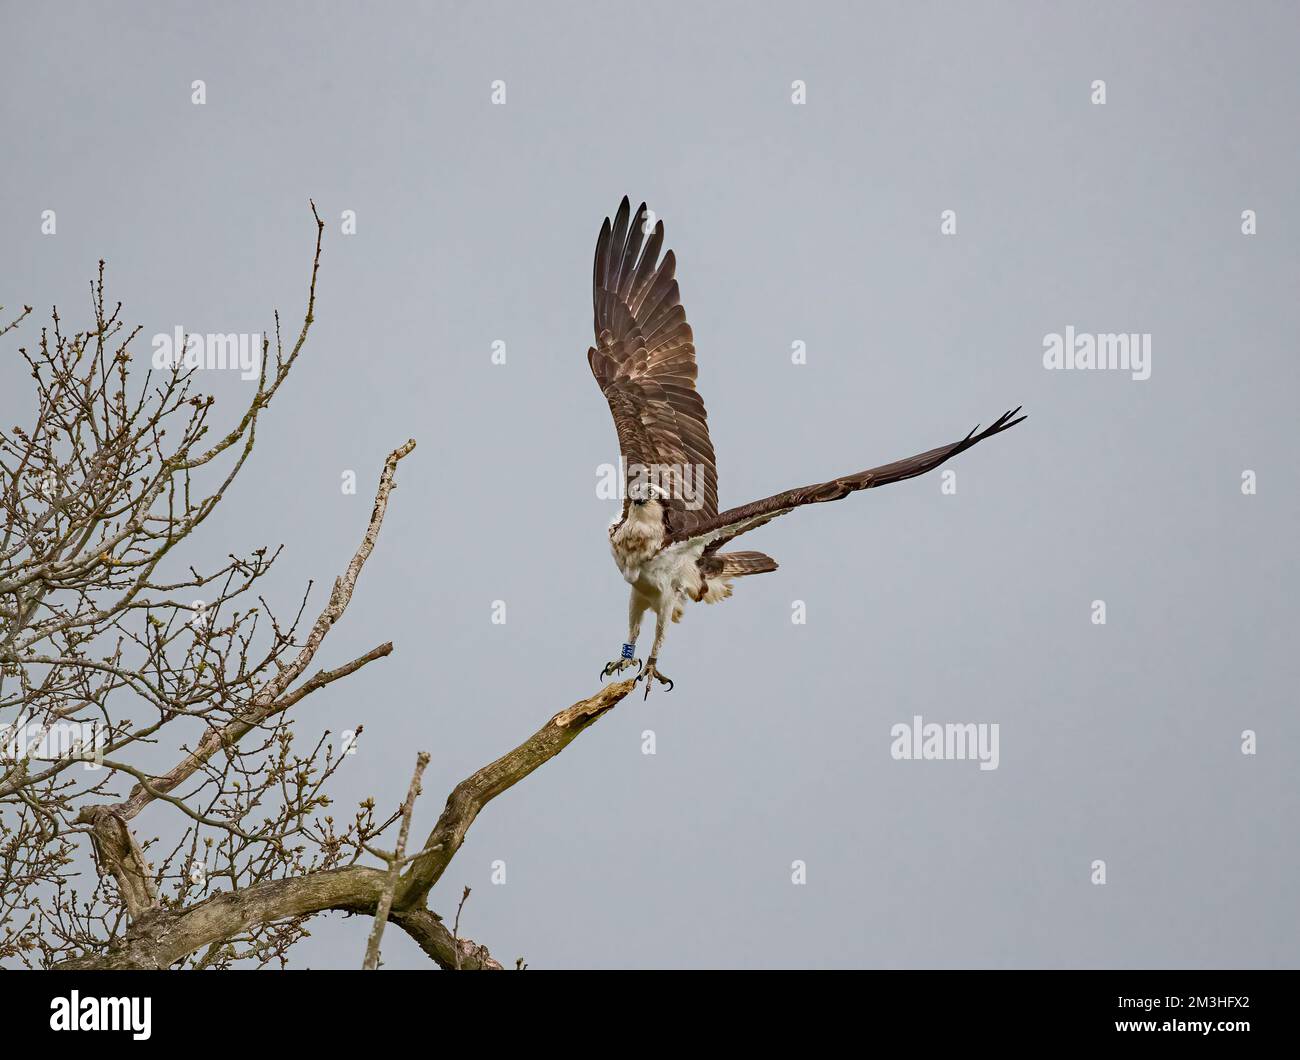 We have lift off . An action  shot of an Osprey (Pandion haliaetus) taking off from  a dead  tree . Sharp talons visible .Rutland, UK Stock Photo